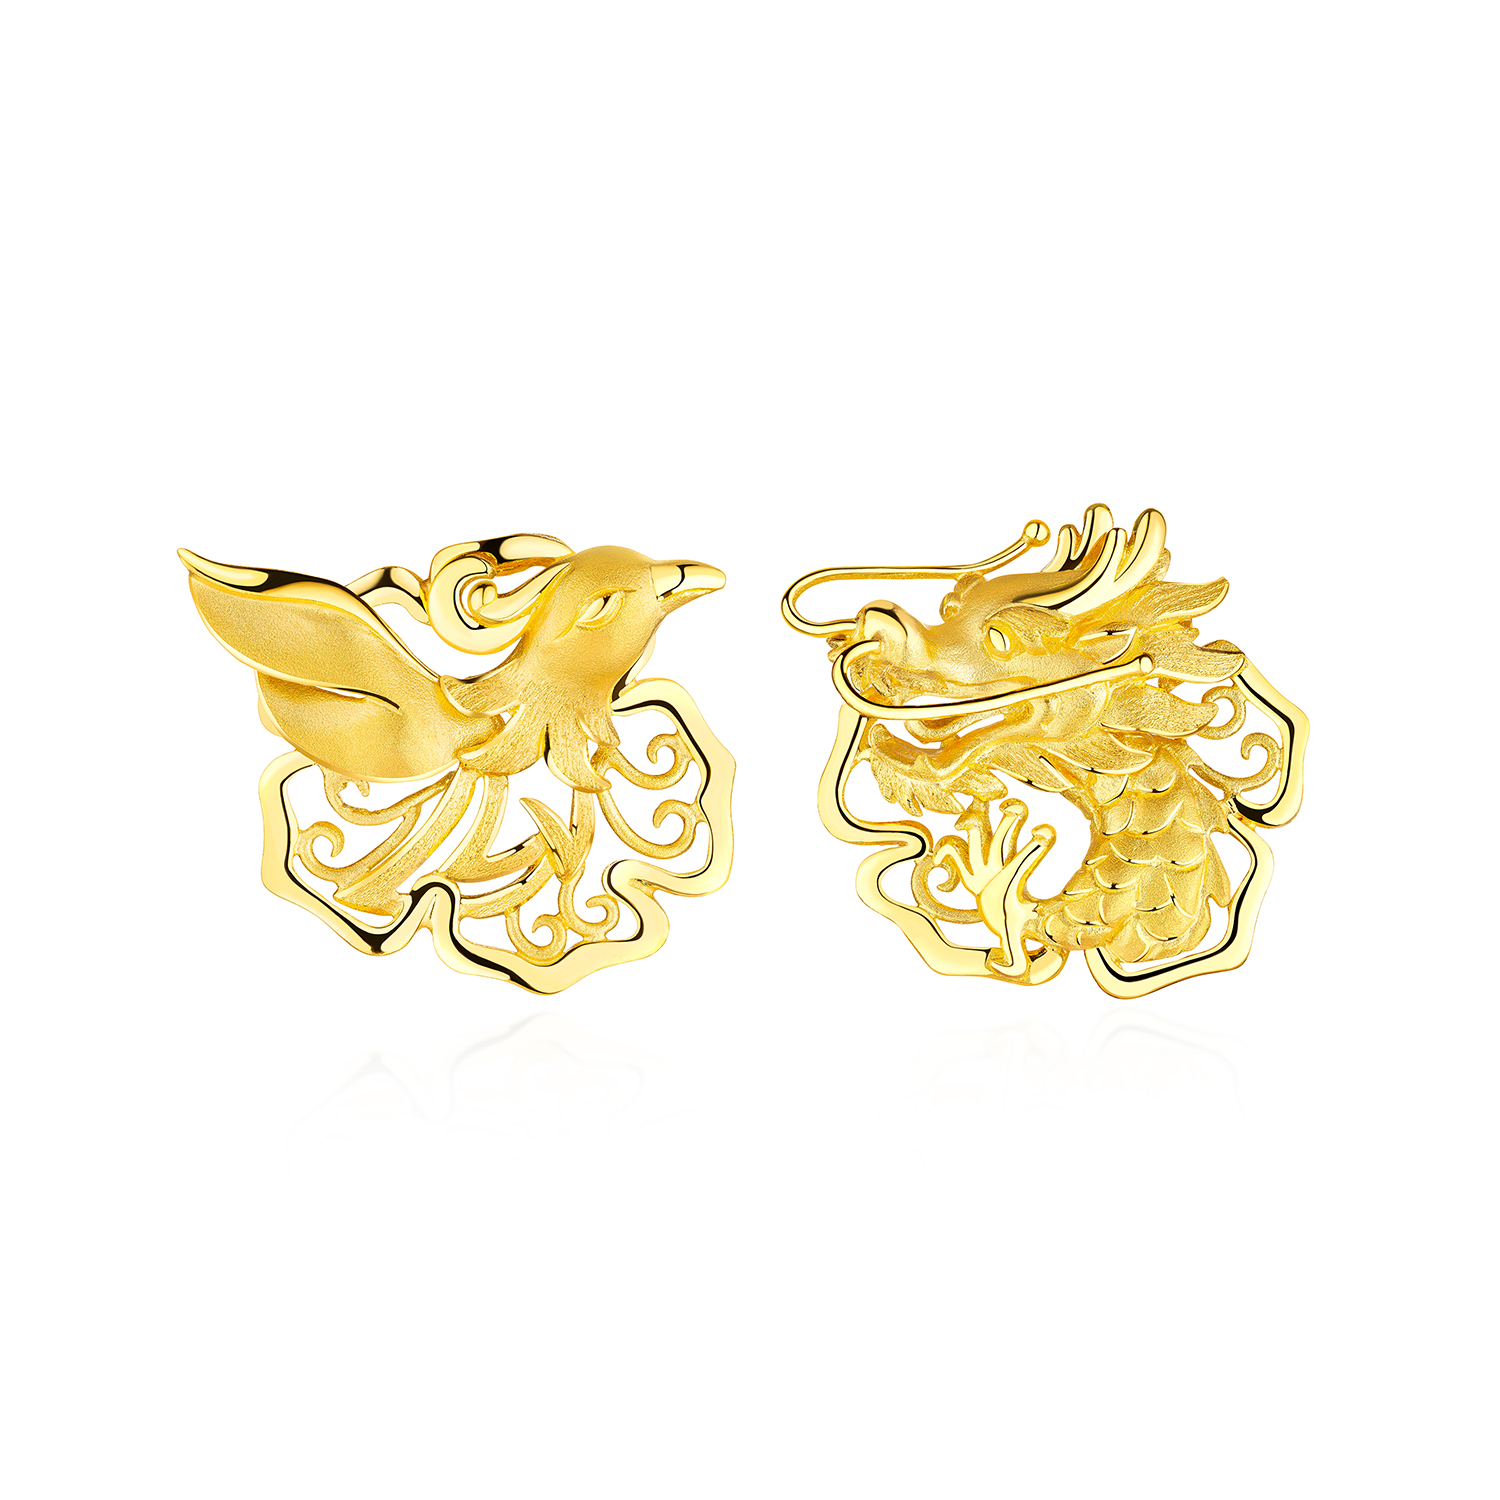 Beloved Collection "Prosperous Dragon and Phoenix" Gold Earrings